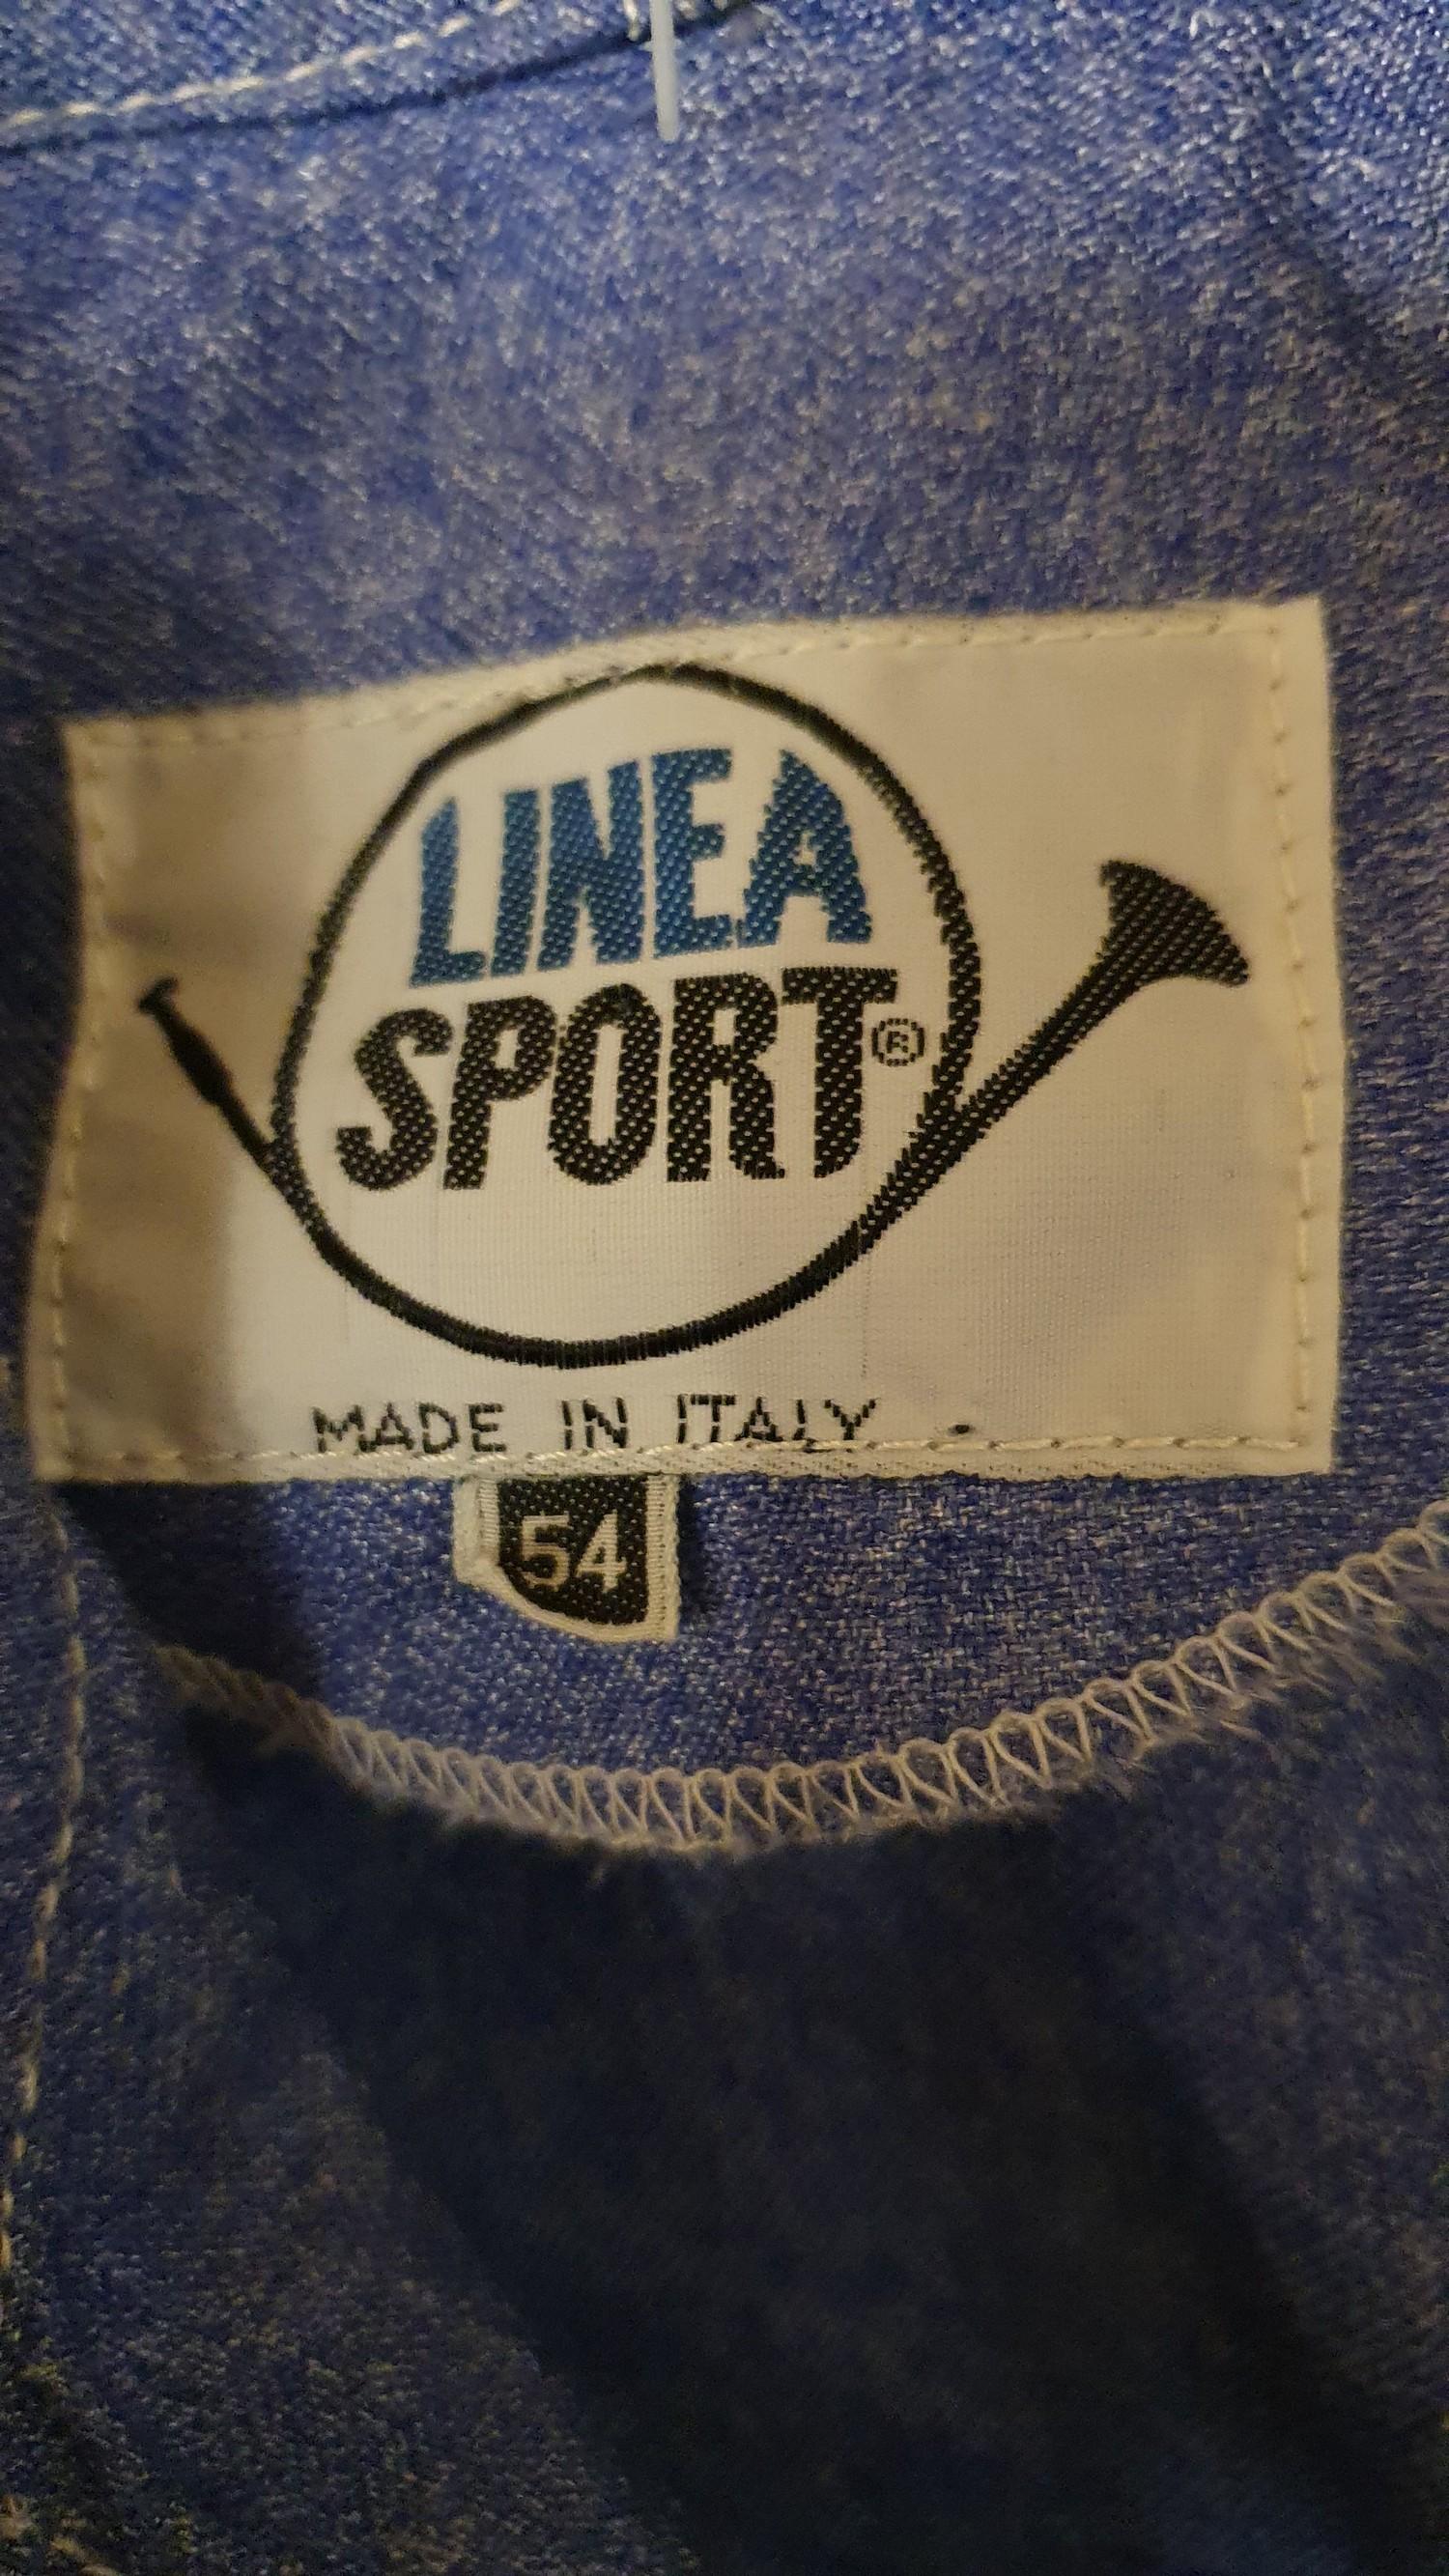 Linea Sport FPT Italian pit overalls, size 54, apparently unused. - Image 3 of 3